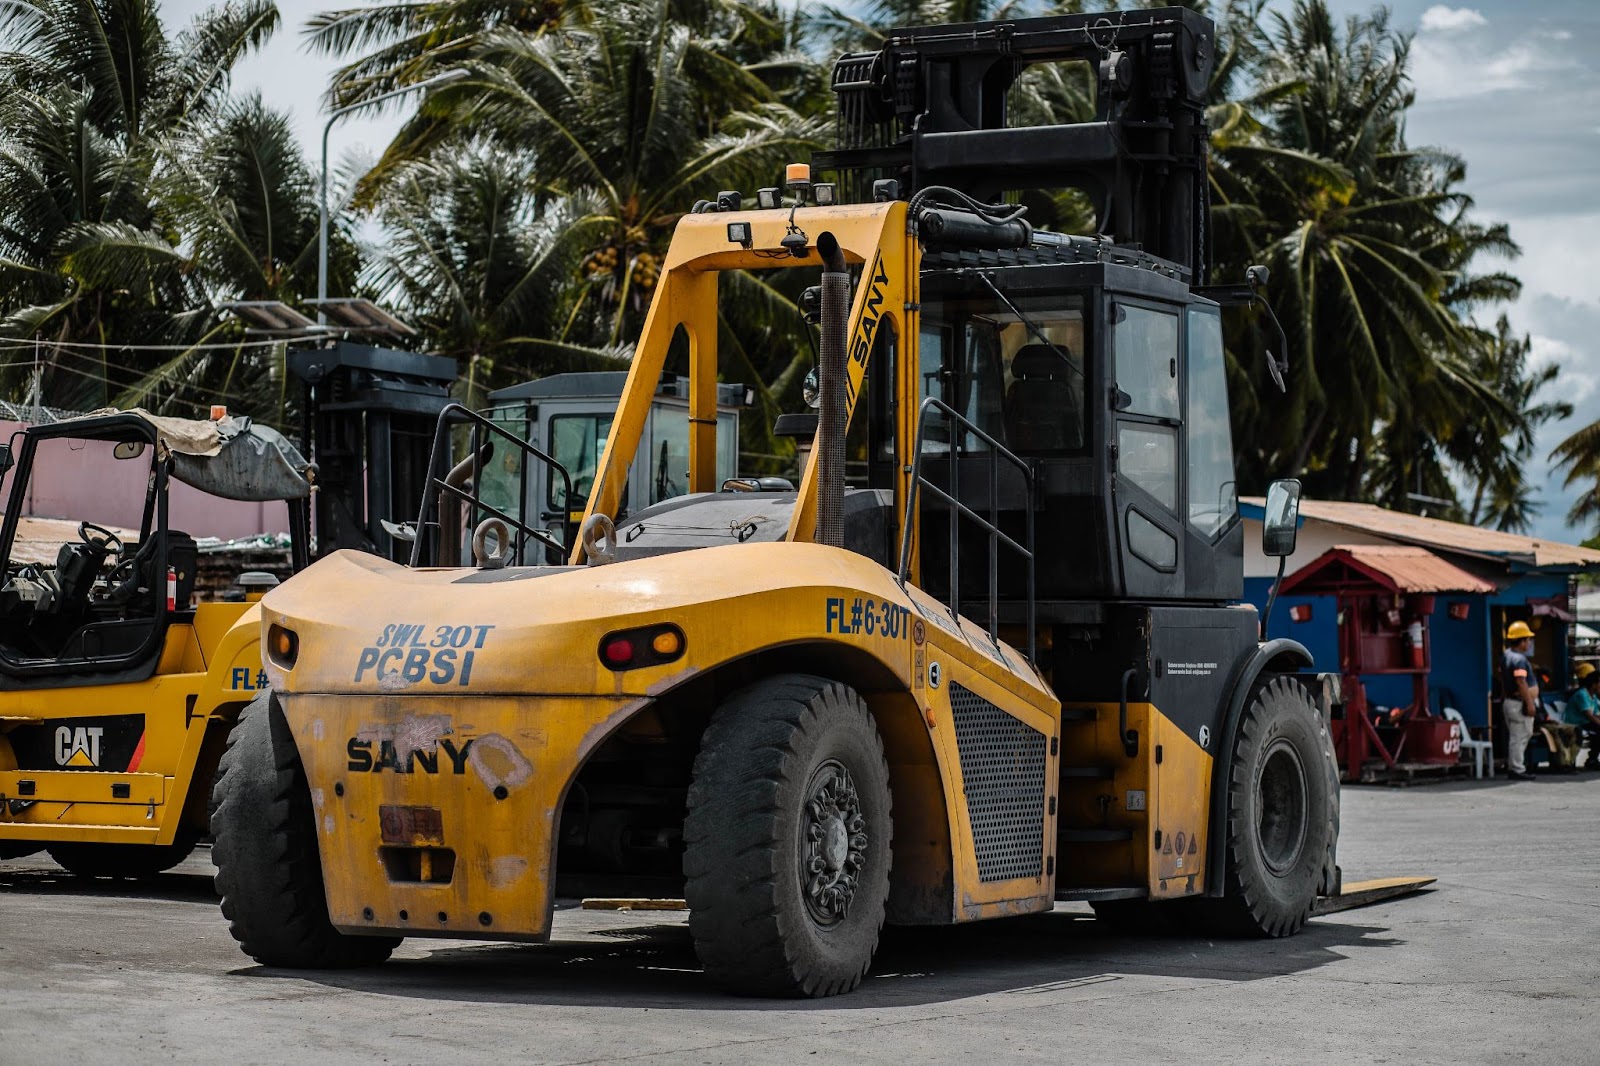 A yellow CAT forklift with pneumatic tires on an asphalt road